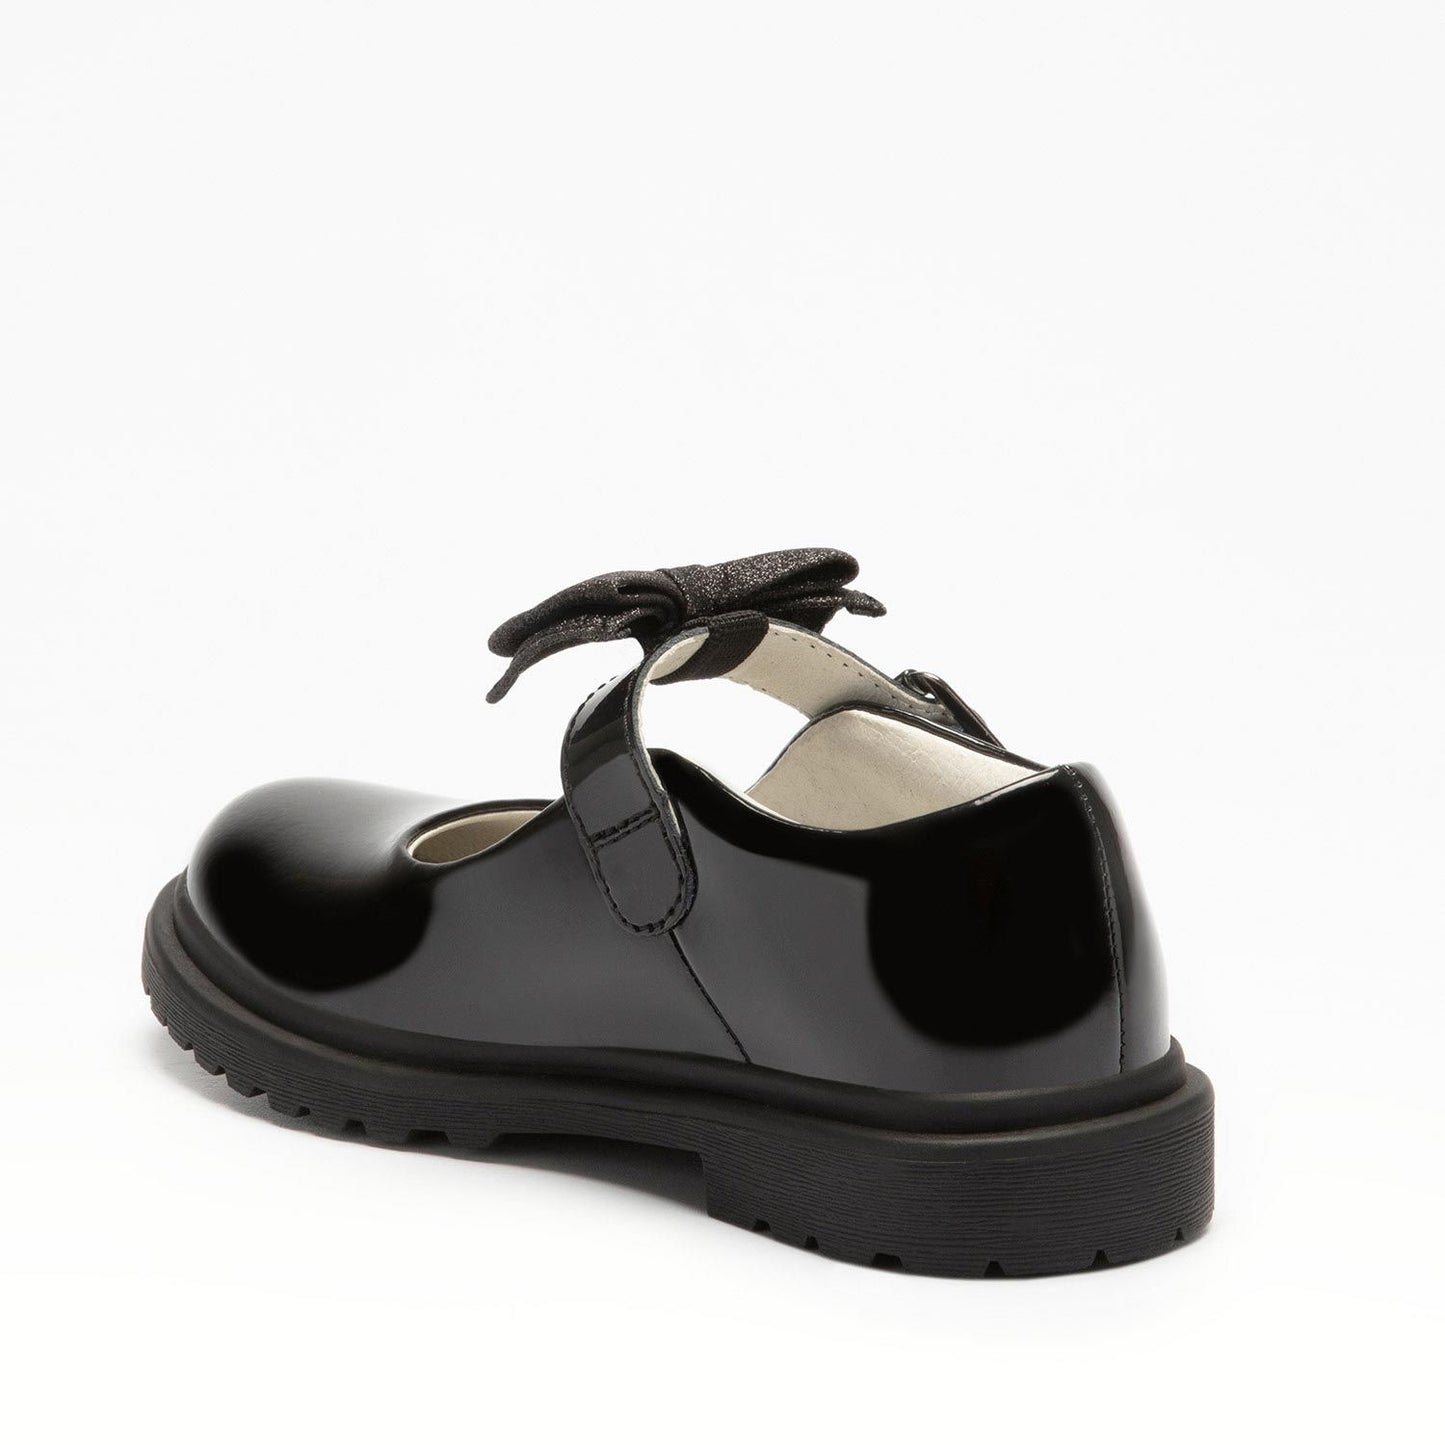 A girls chunky Mary Jane school shoe by Lelli Kelly, style LK8359 Mollie, in black patent leather with buckle fastening and detachable fabric bow. Angled view.